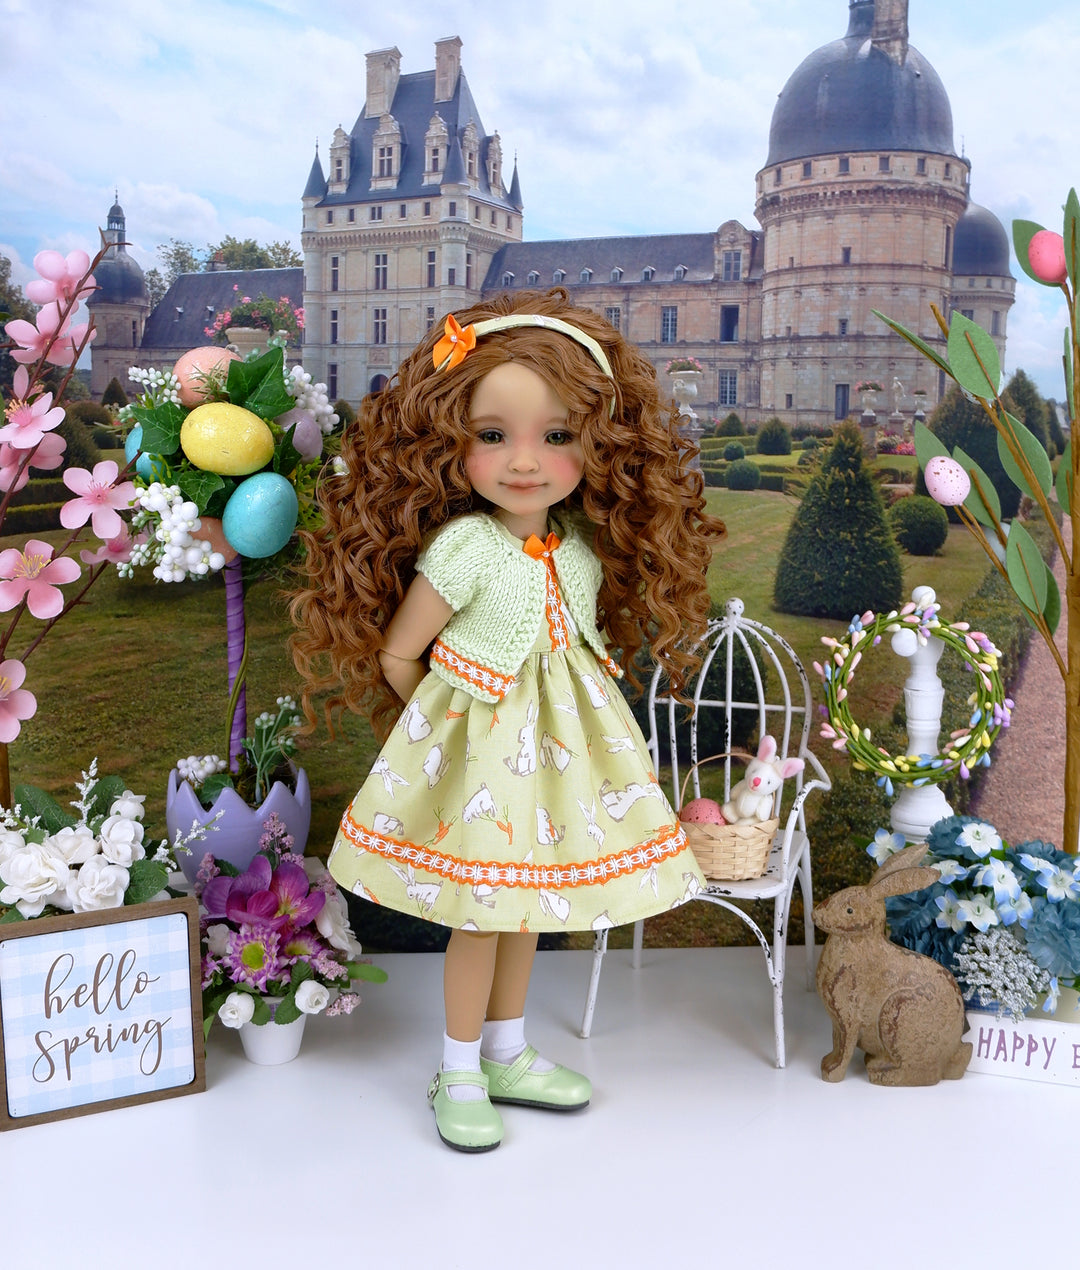 Little Garden Bunny - dress and sweater with shoes for Ruby Red Fashion Friends doll